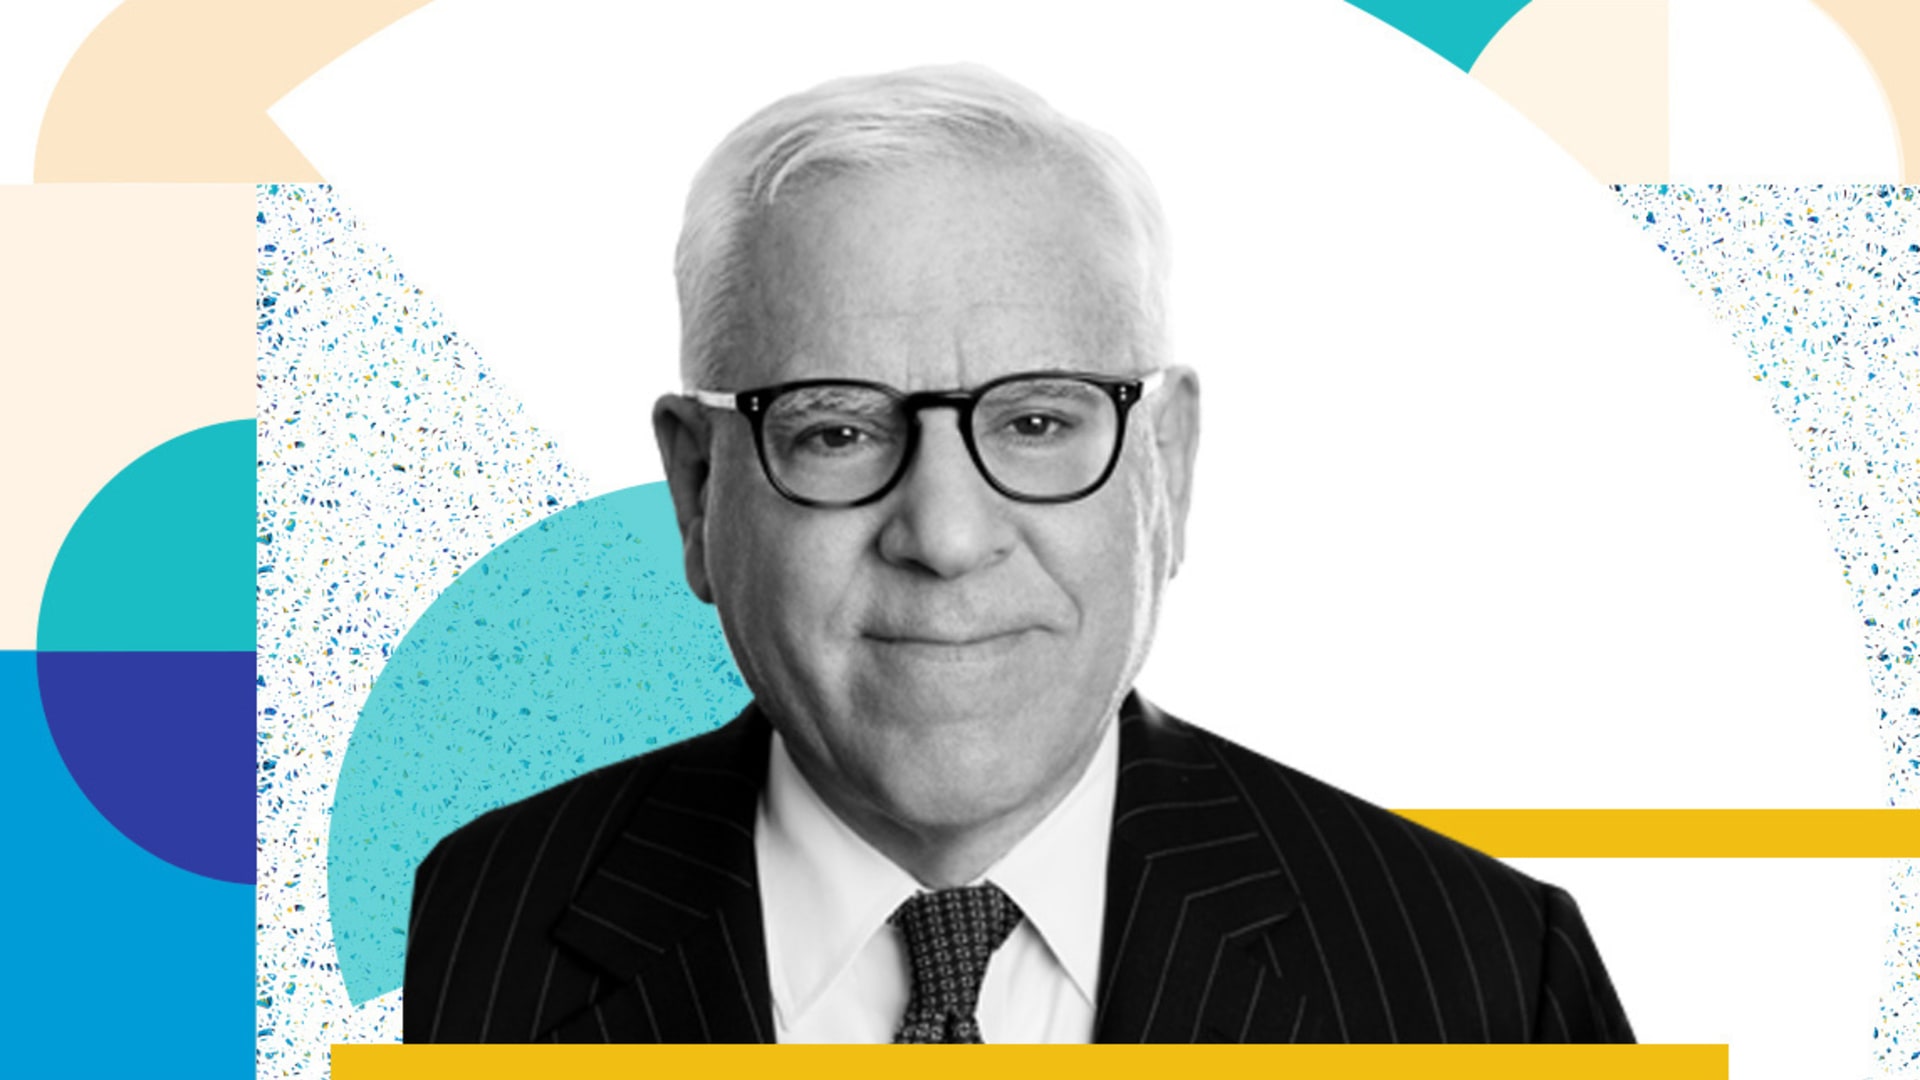 Business Icon David Rubenstein of Carlyle on What Makes a Good Leader